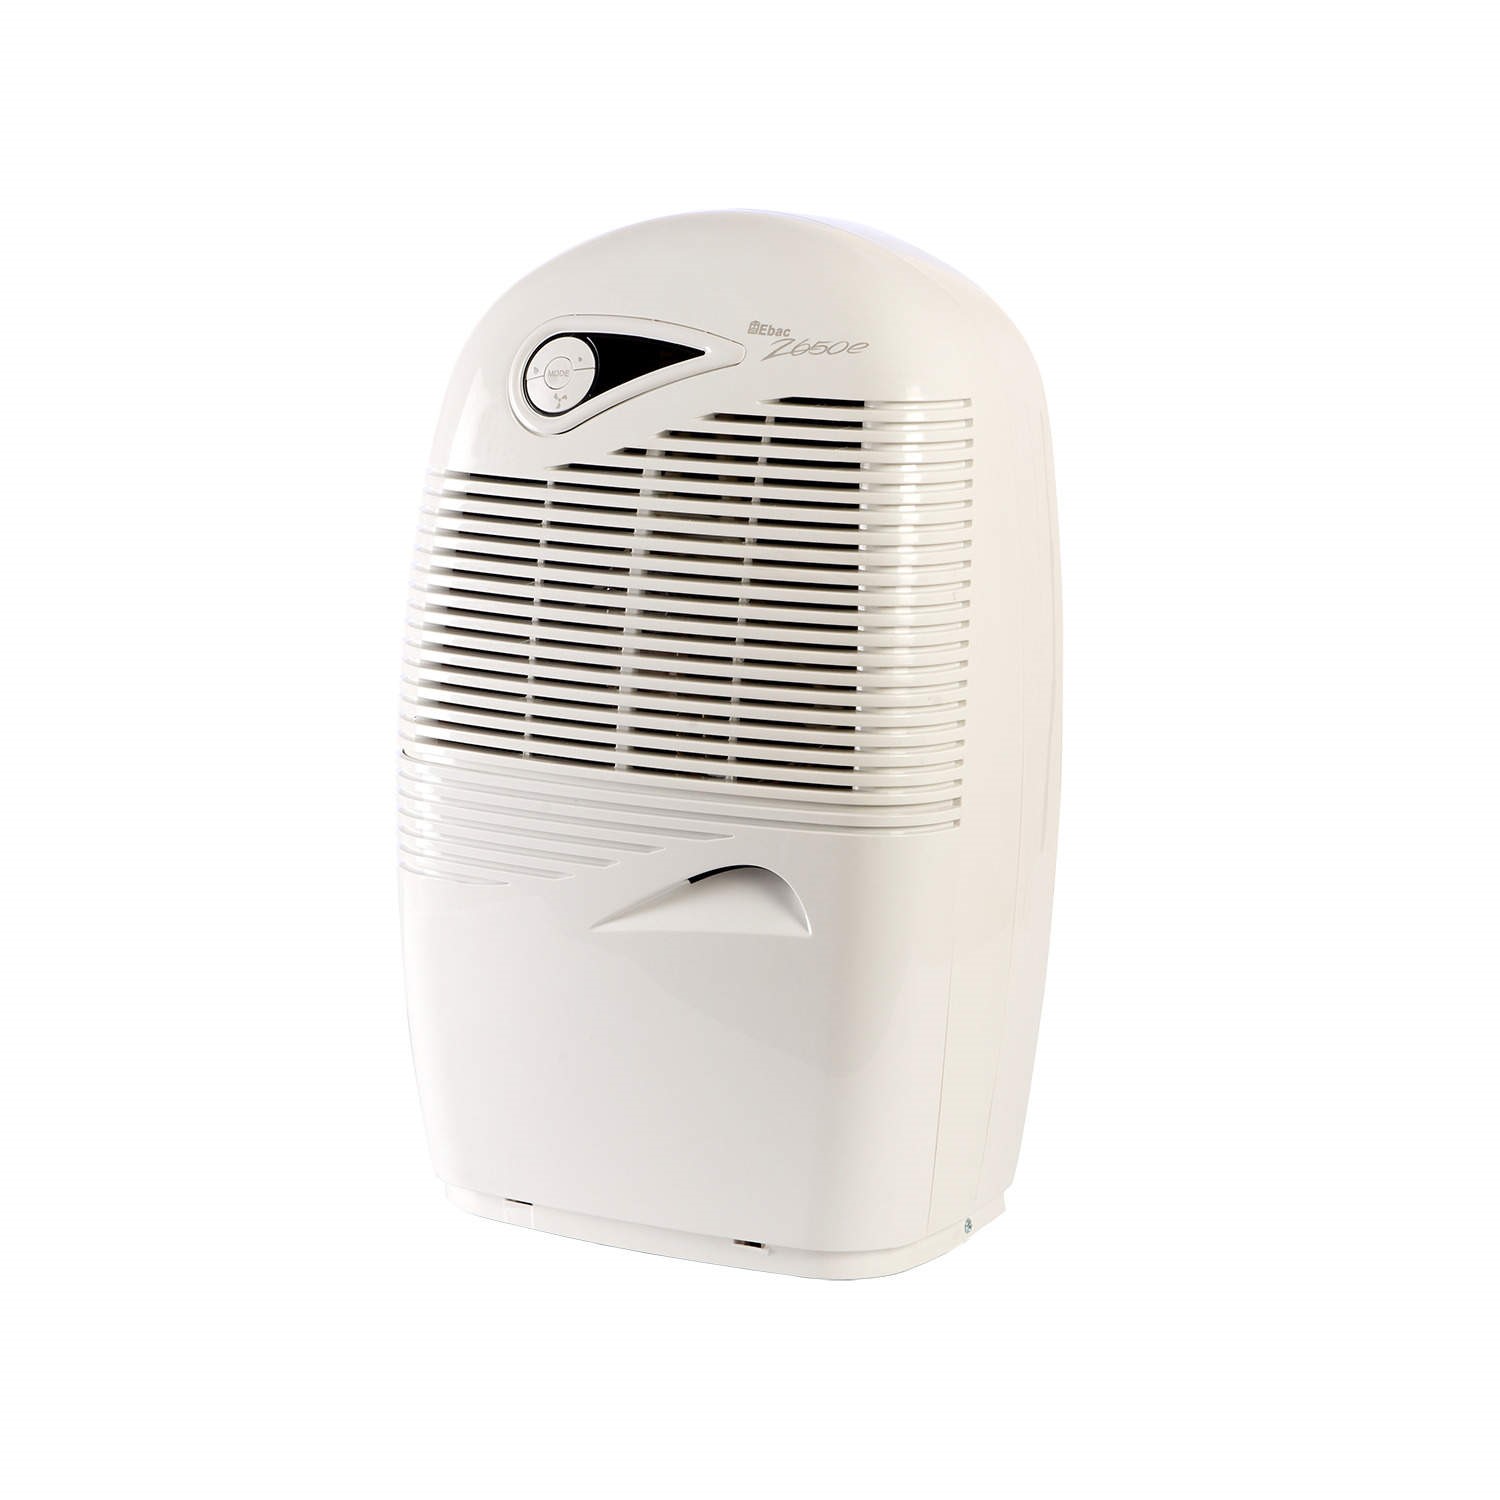 Ebac 2650E 18 Litre Dehumidifier with Air Purifier and Laundry Mode